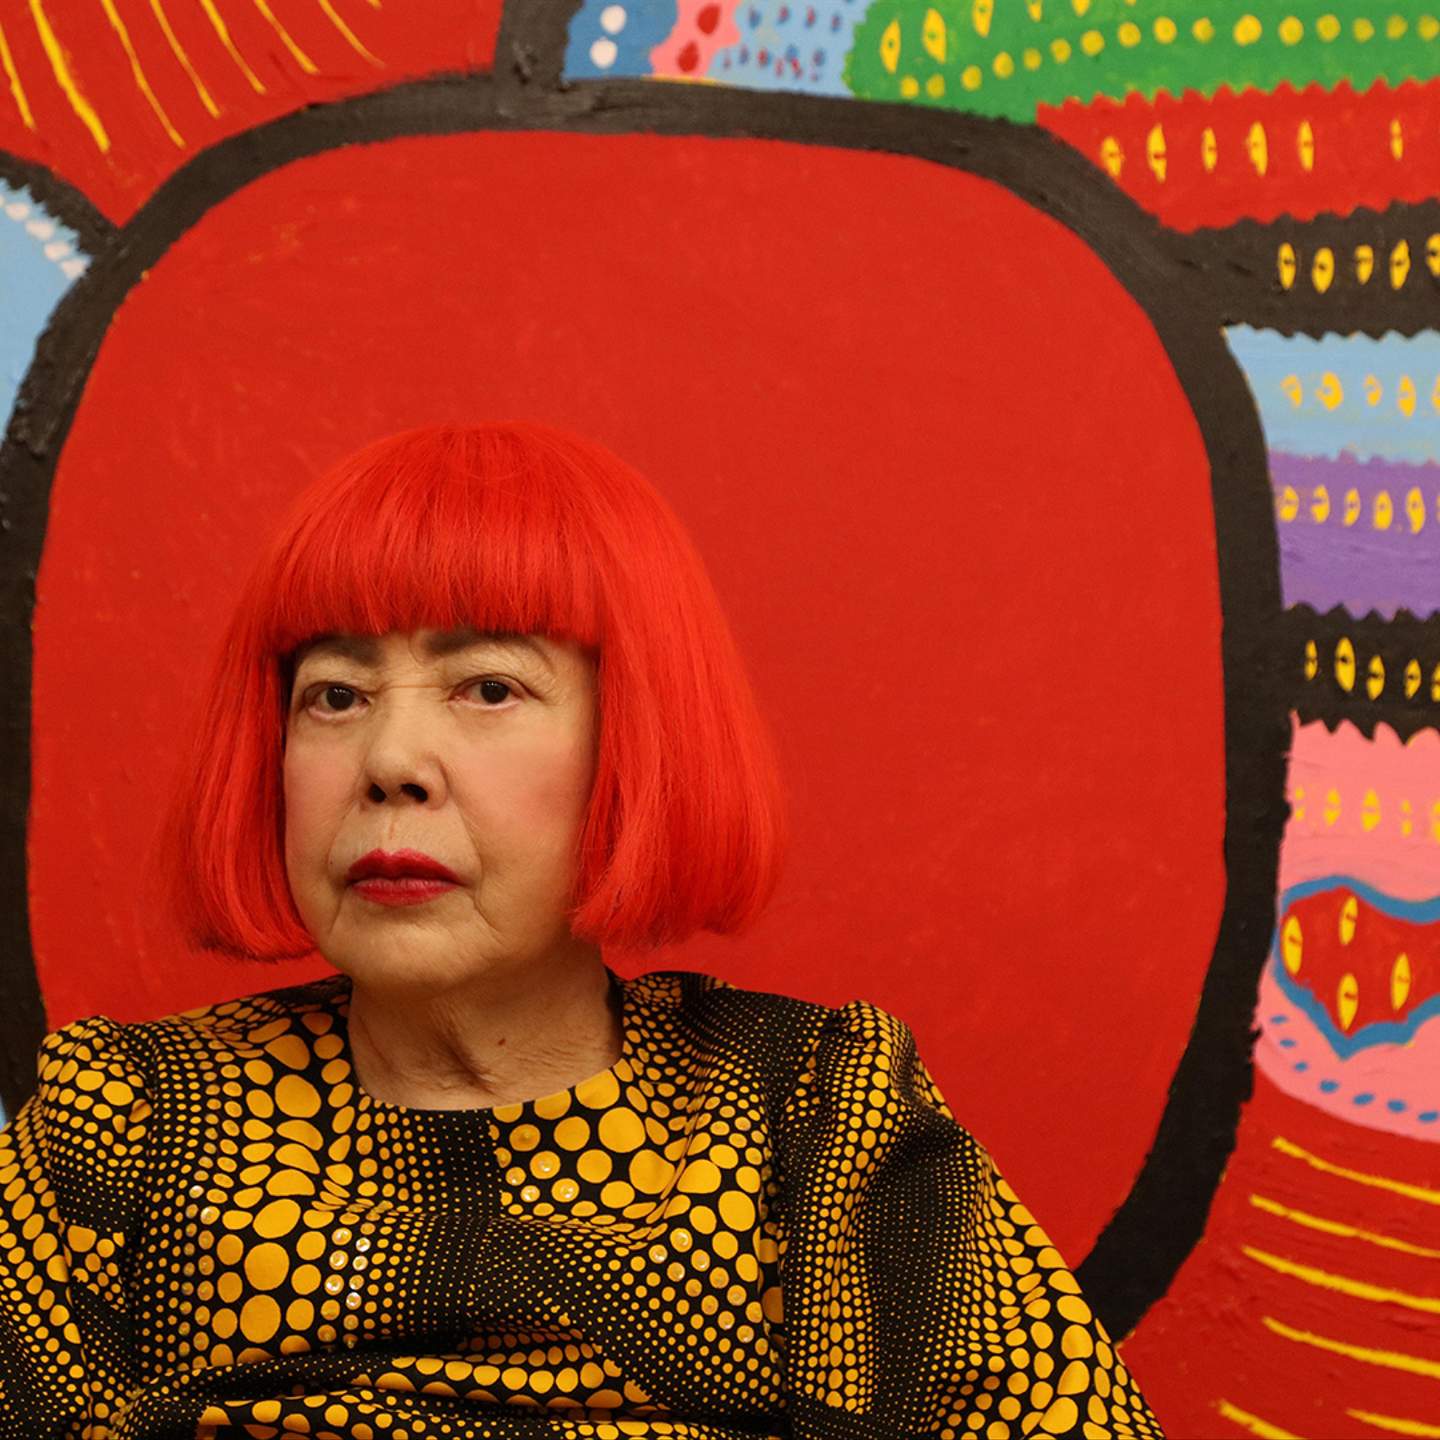 Yayoi Kusama to Open Her Own Museum in Tokyo - The New York Times